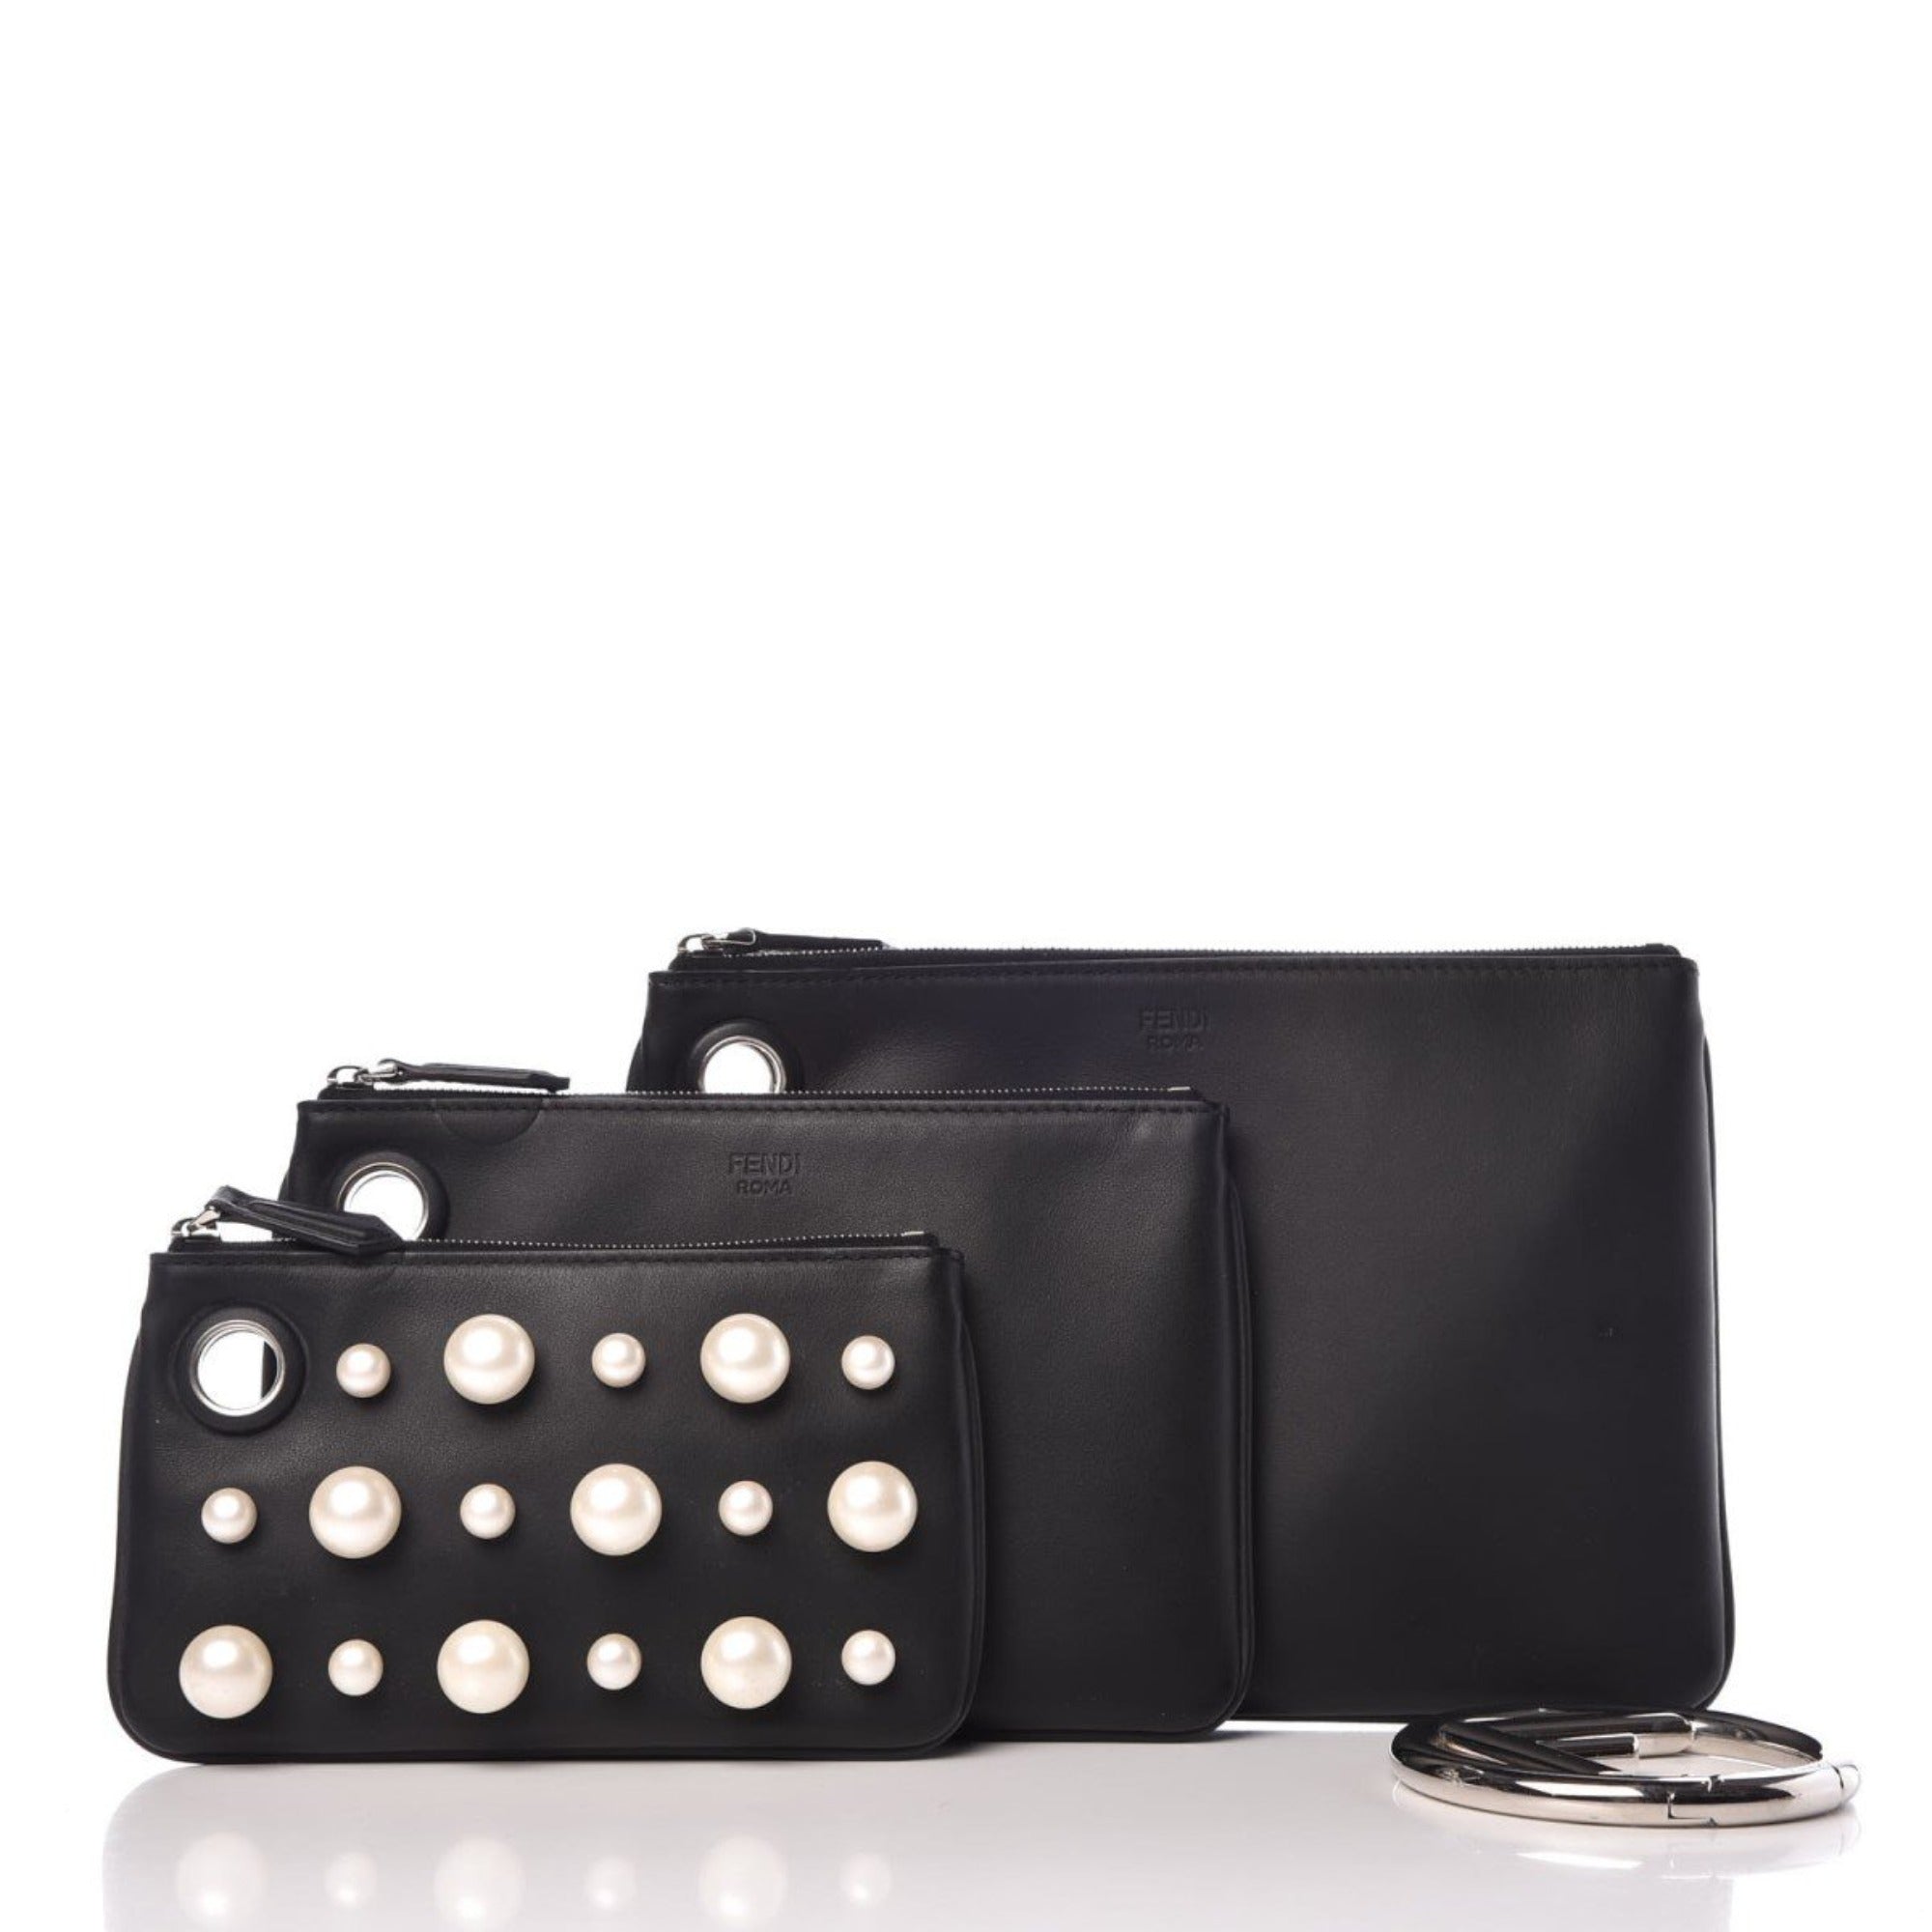 Fendi Women's Black Leather Pearl Studded Triplette Multi Clutch Handbag at_Queen_Bee_of_Beverly_Hills